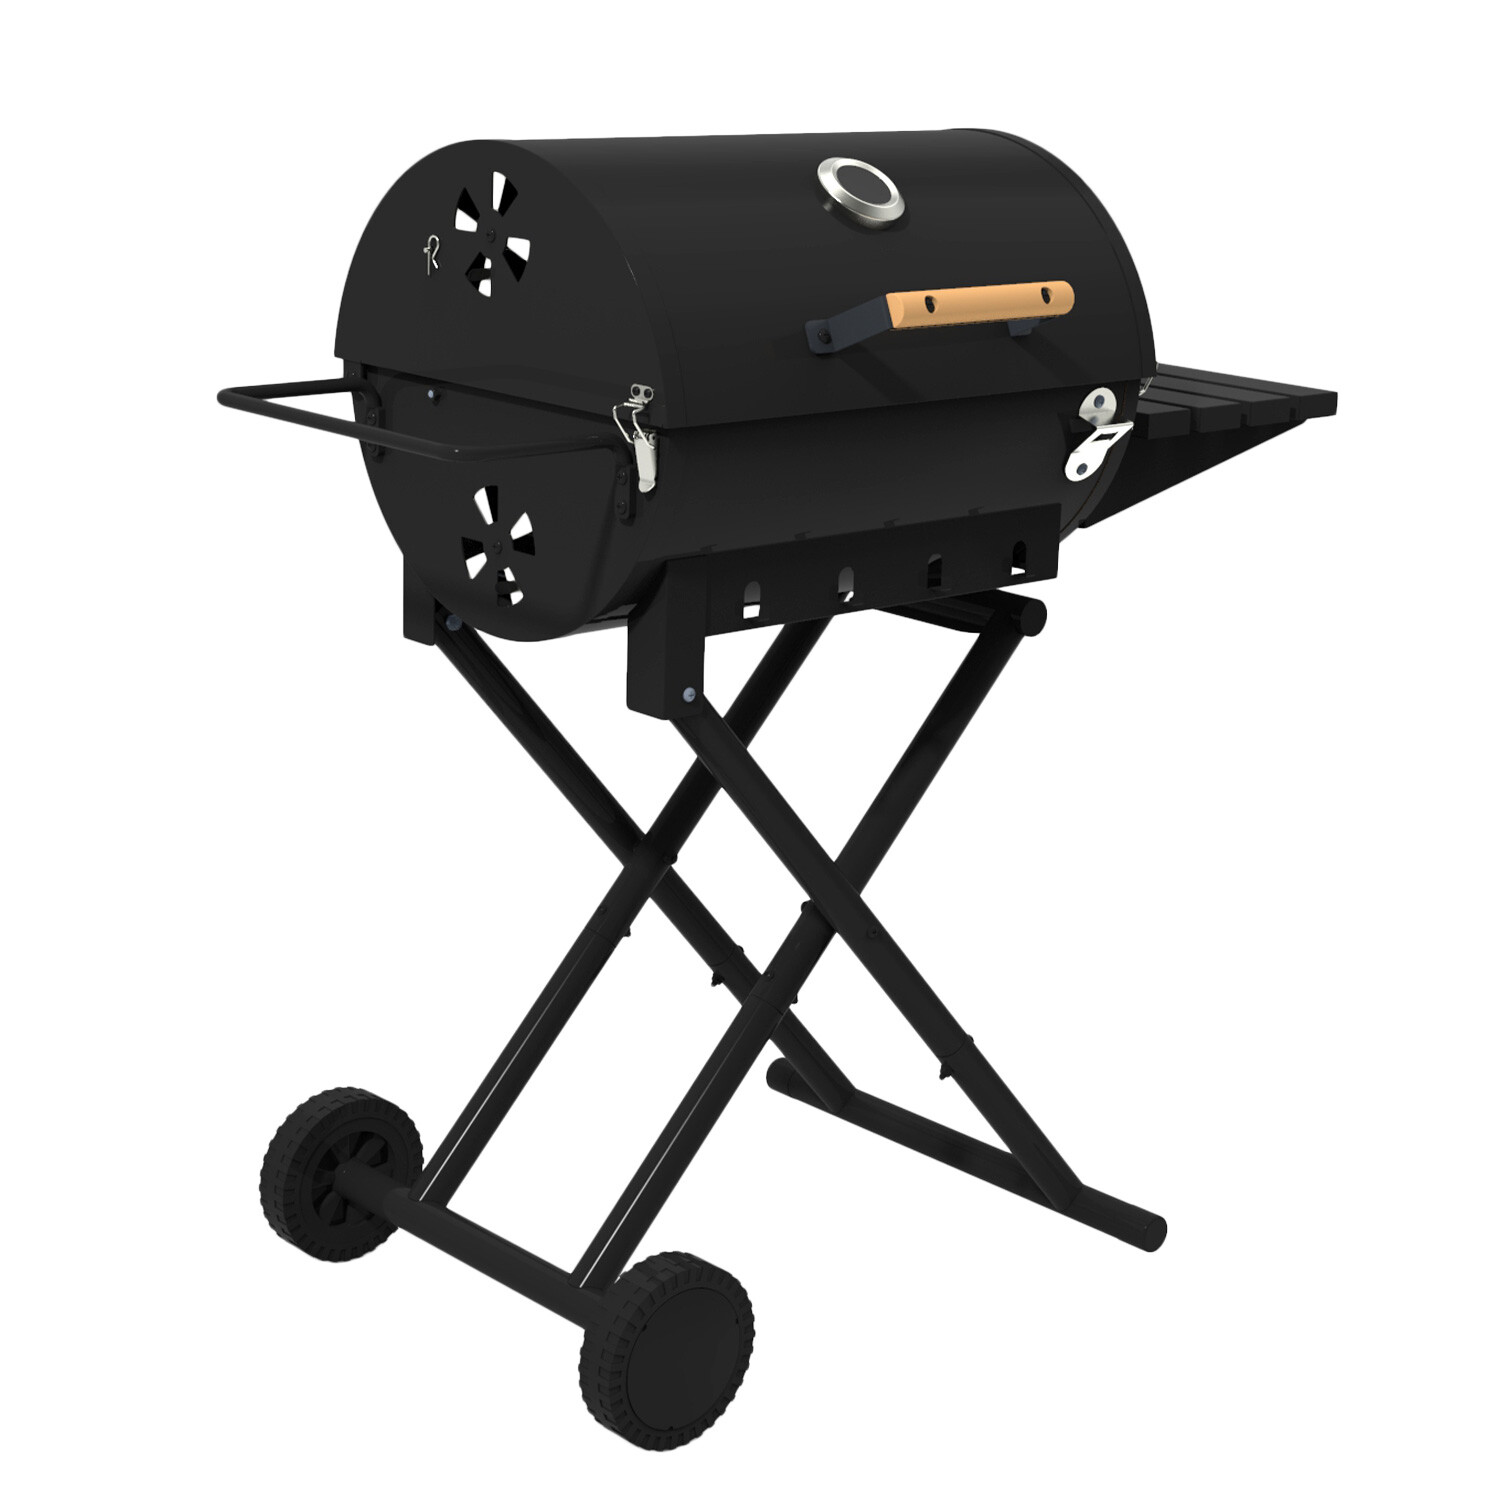 Memphis Foldable Grill and Tools - Black Image 1